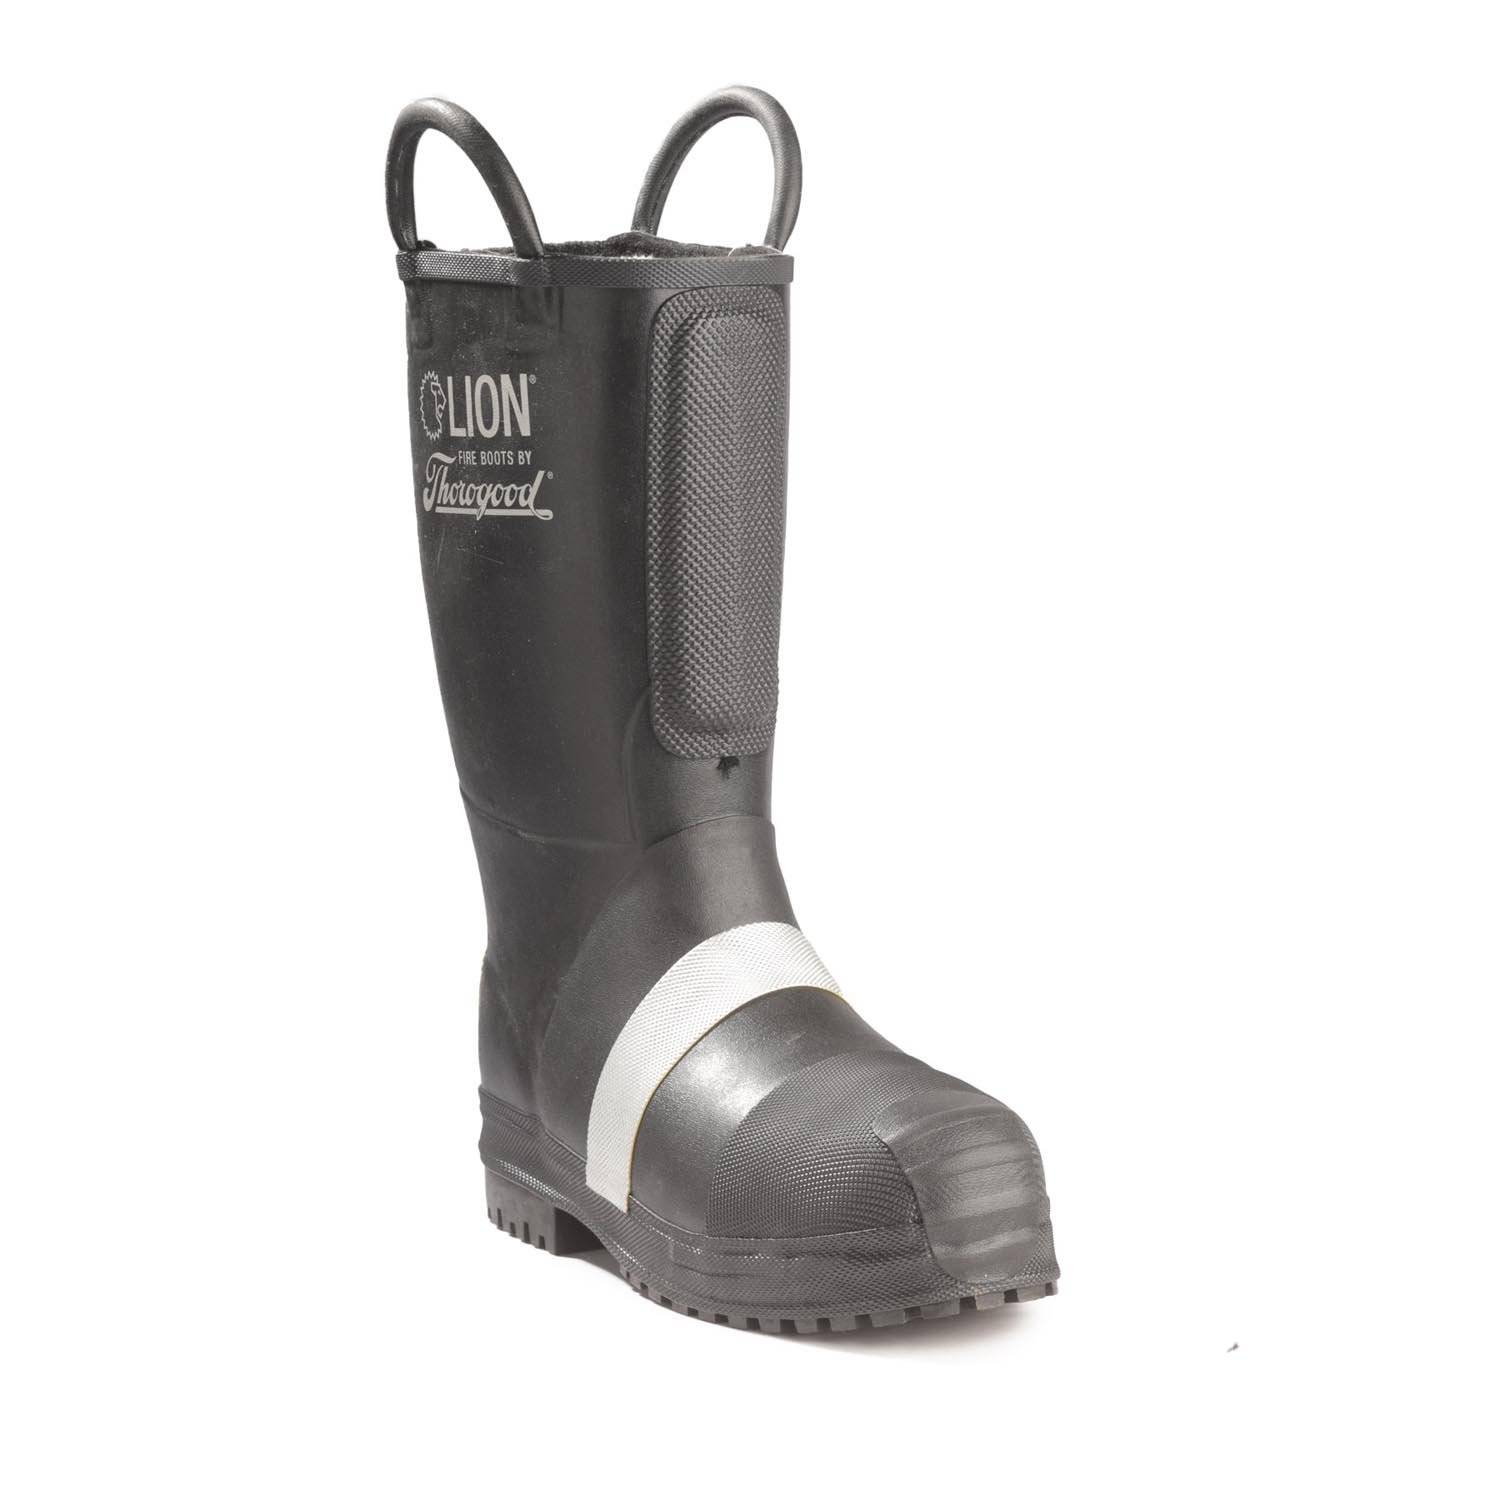 LION by Thorogood Womens HellFire Felt Insulated Rubber Boot